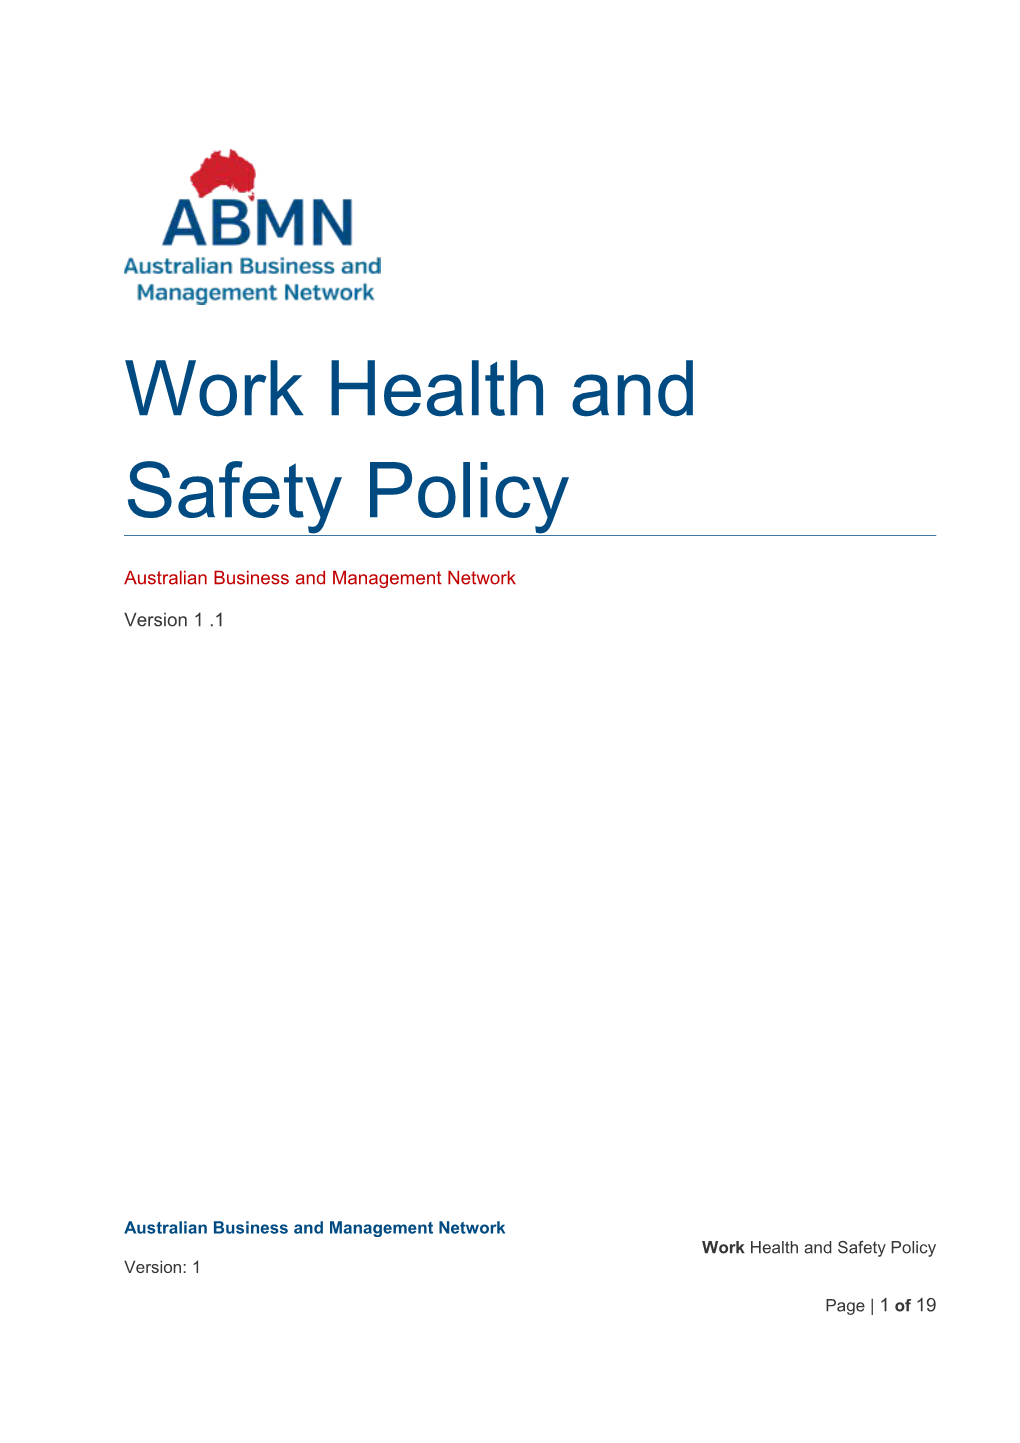 Work Health and Safety Policy